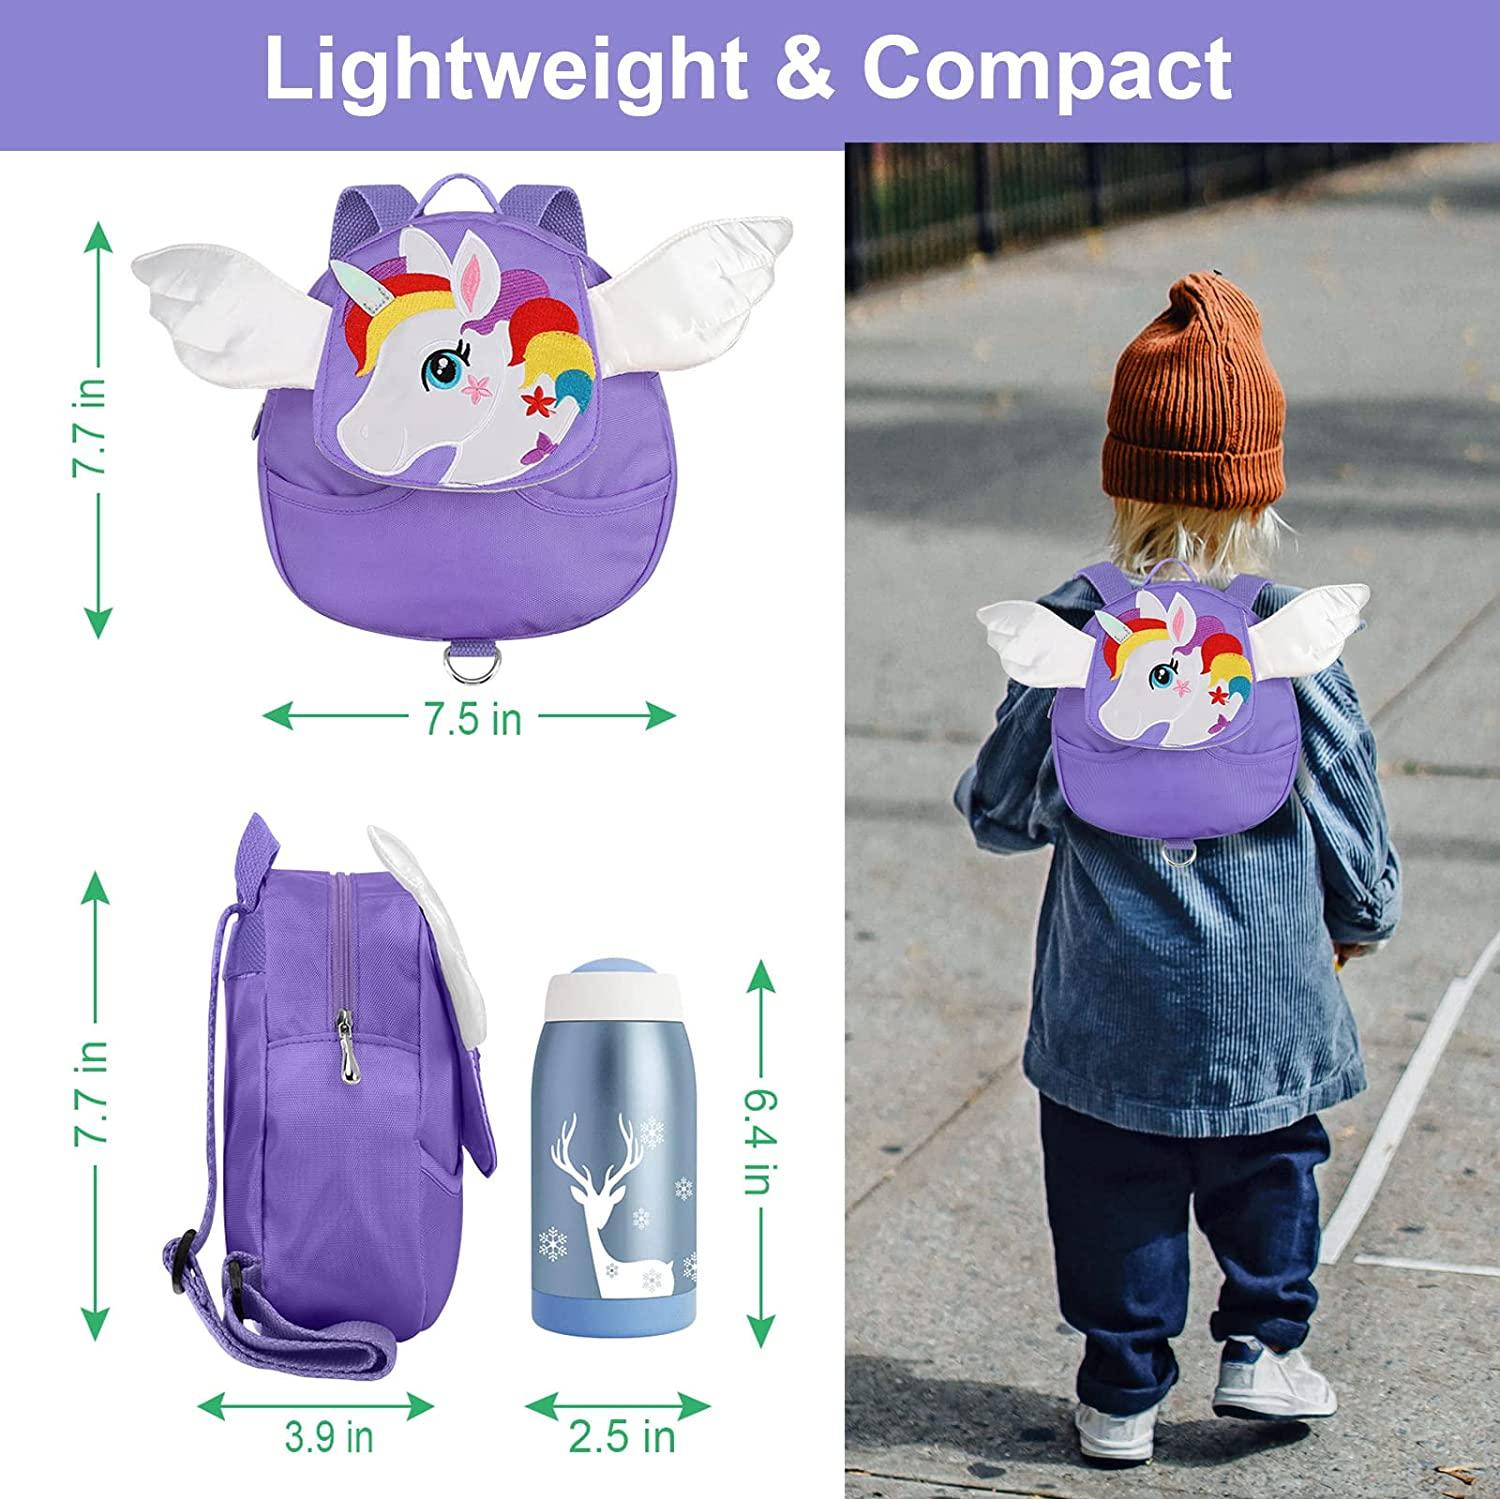 NEW Unicorn Toddler Backpack with Small Leash - MOMMORE